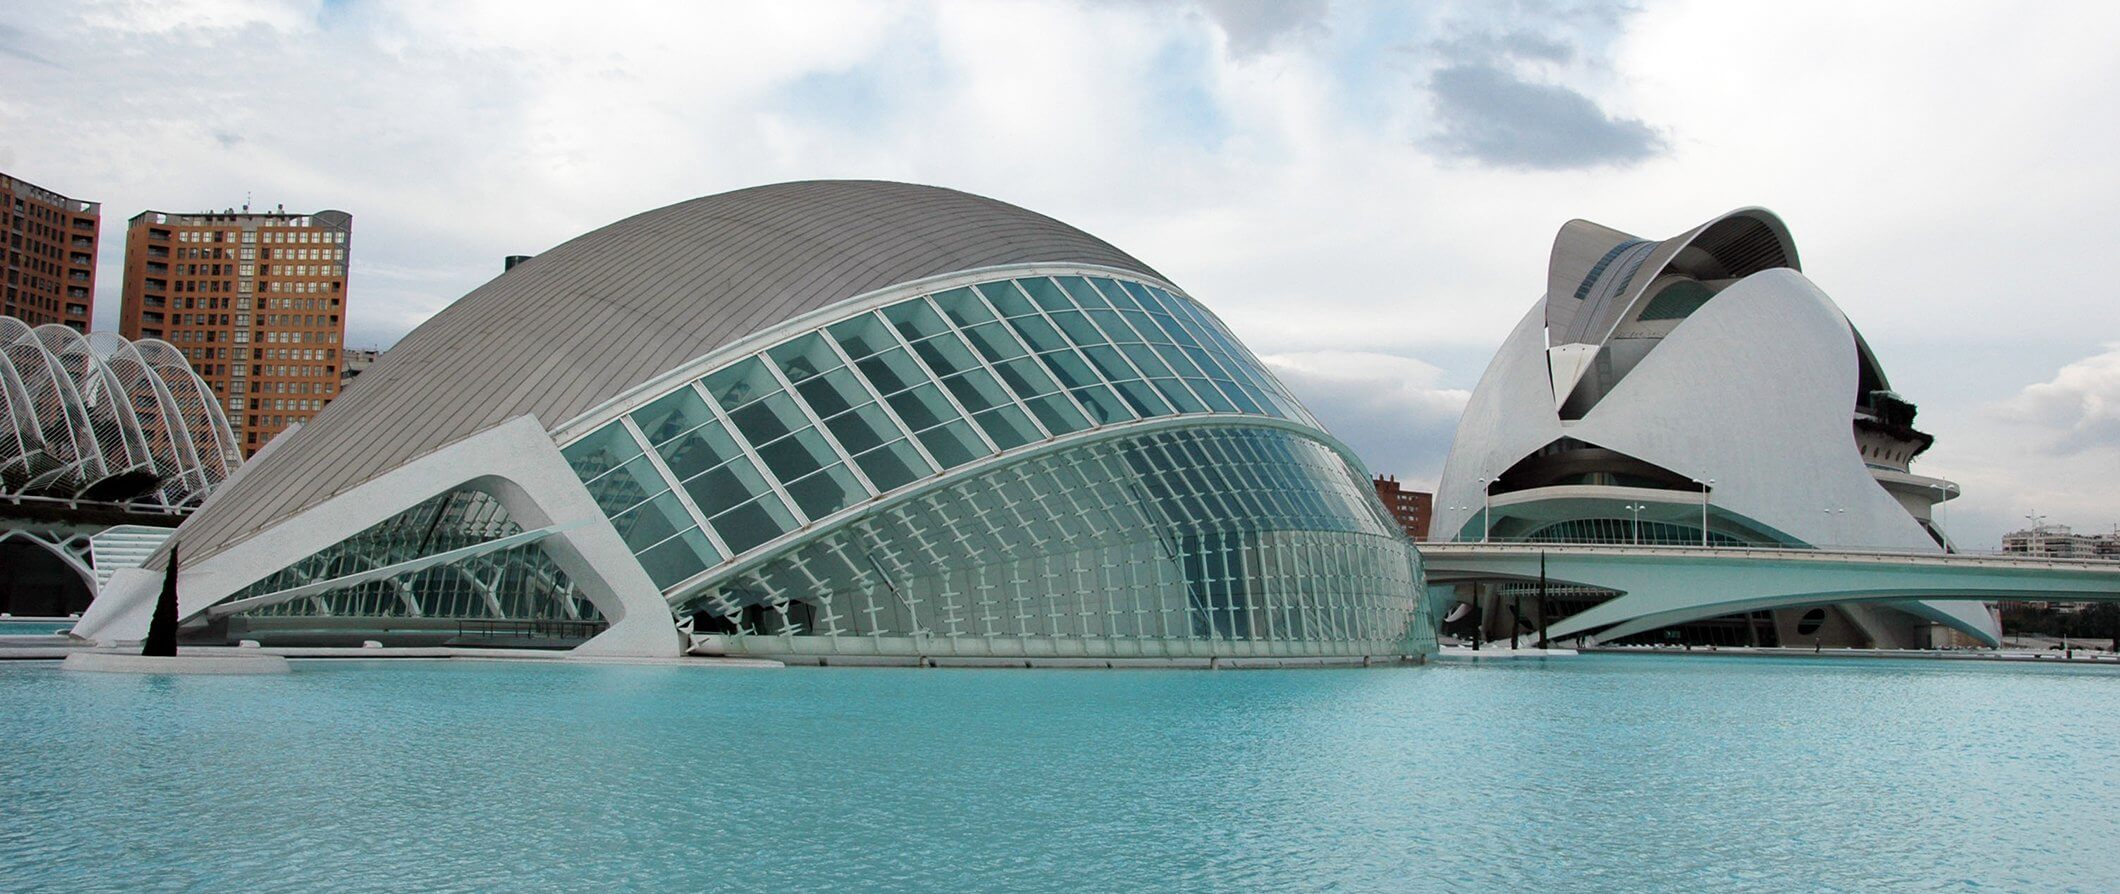 Modern building in Valencia surrounded by water